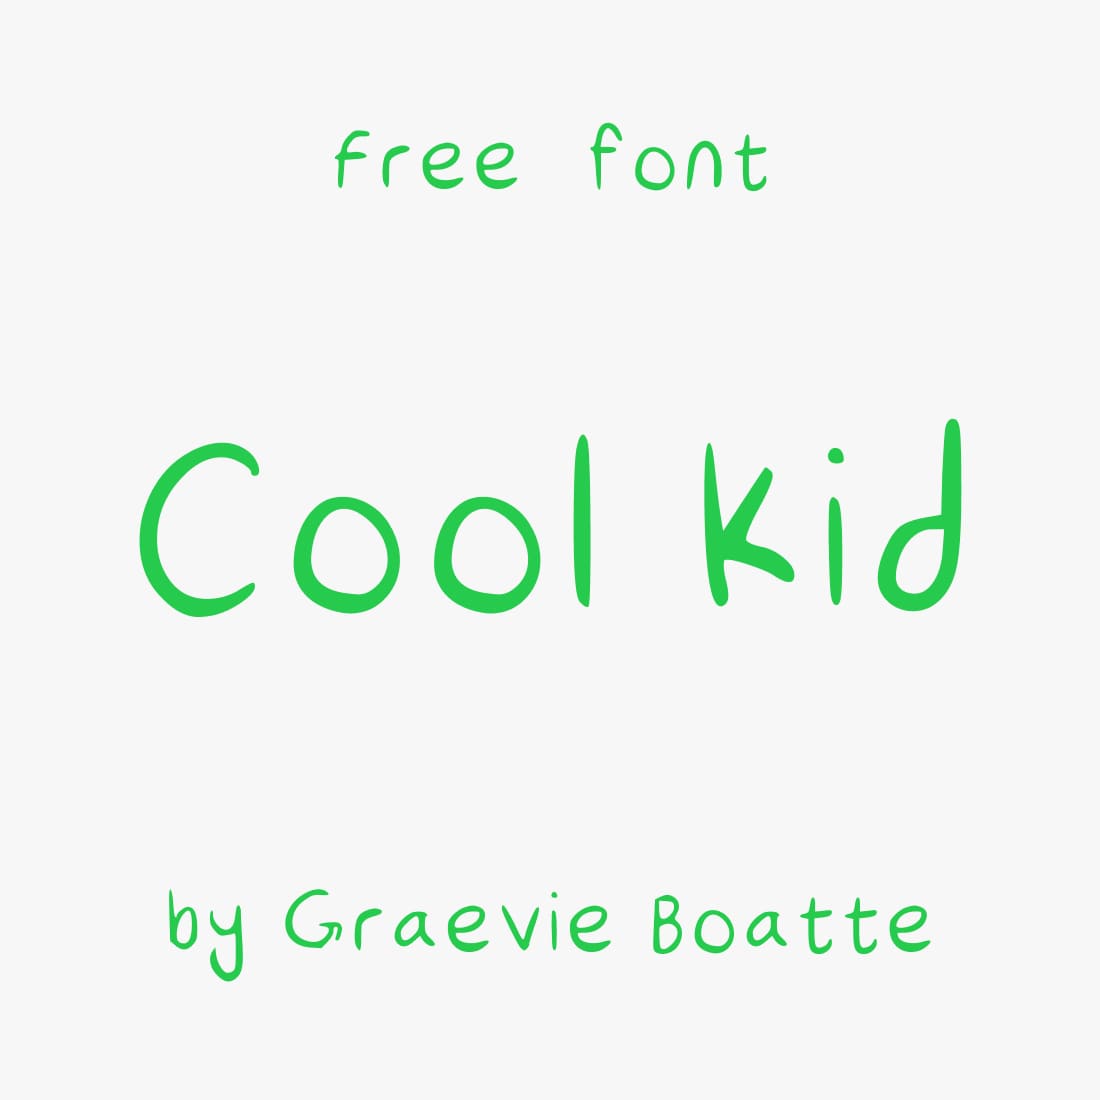 Cool Kid Free Font Main Cover Preview by MasterBundles.